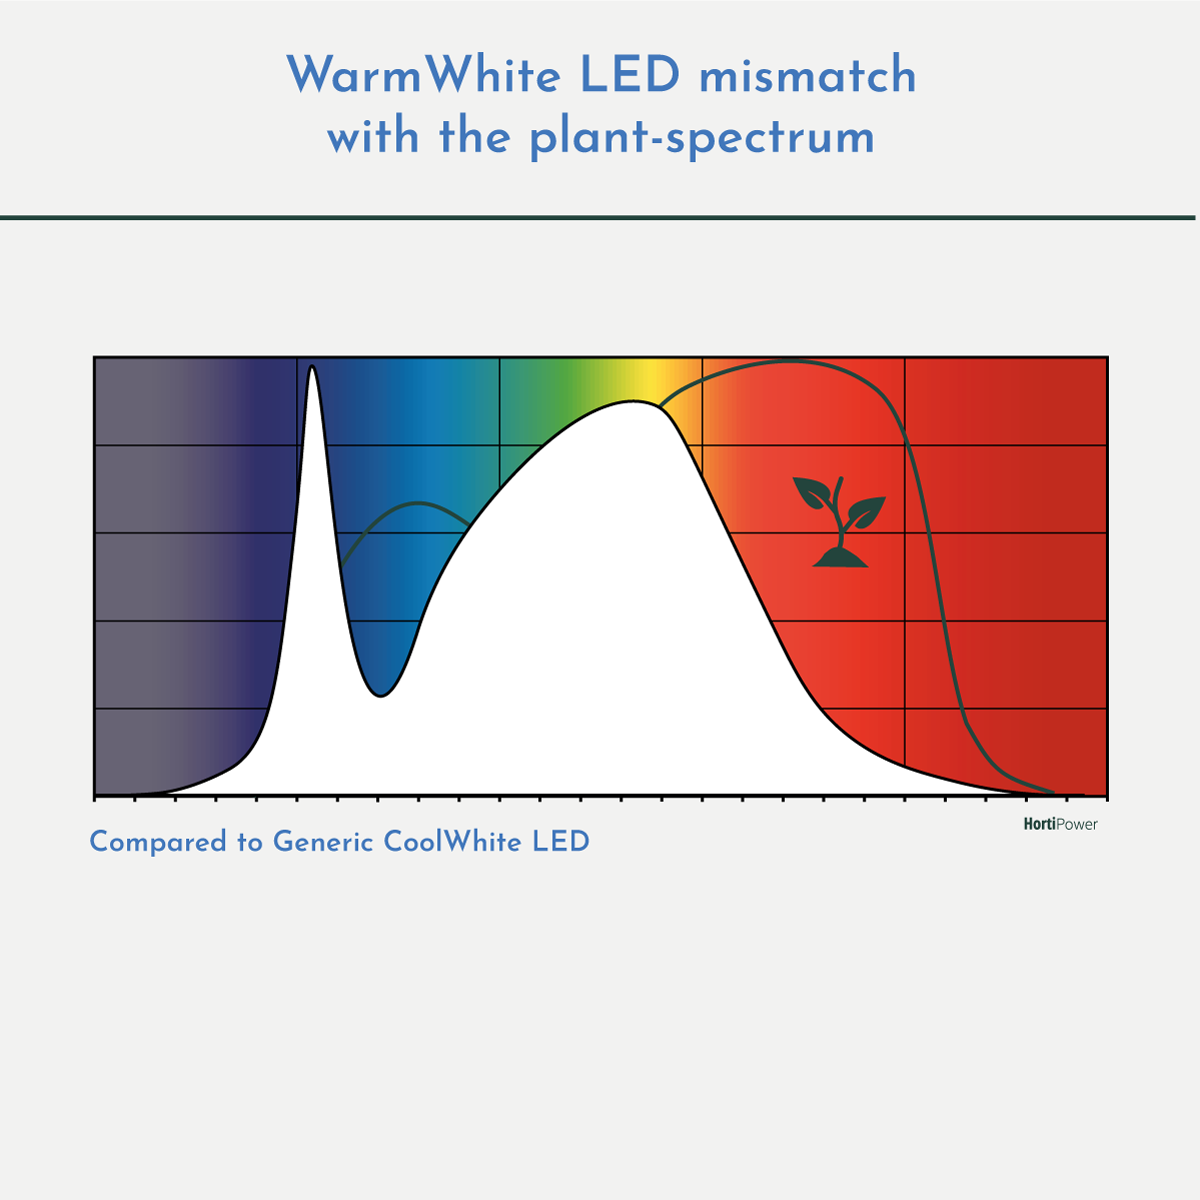 Warmwhite LED light spectrum and the plant spectrum